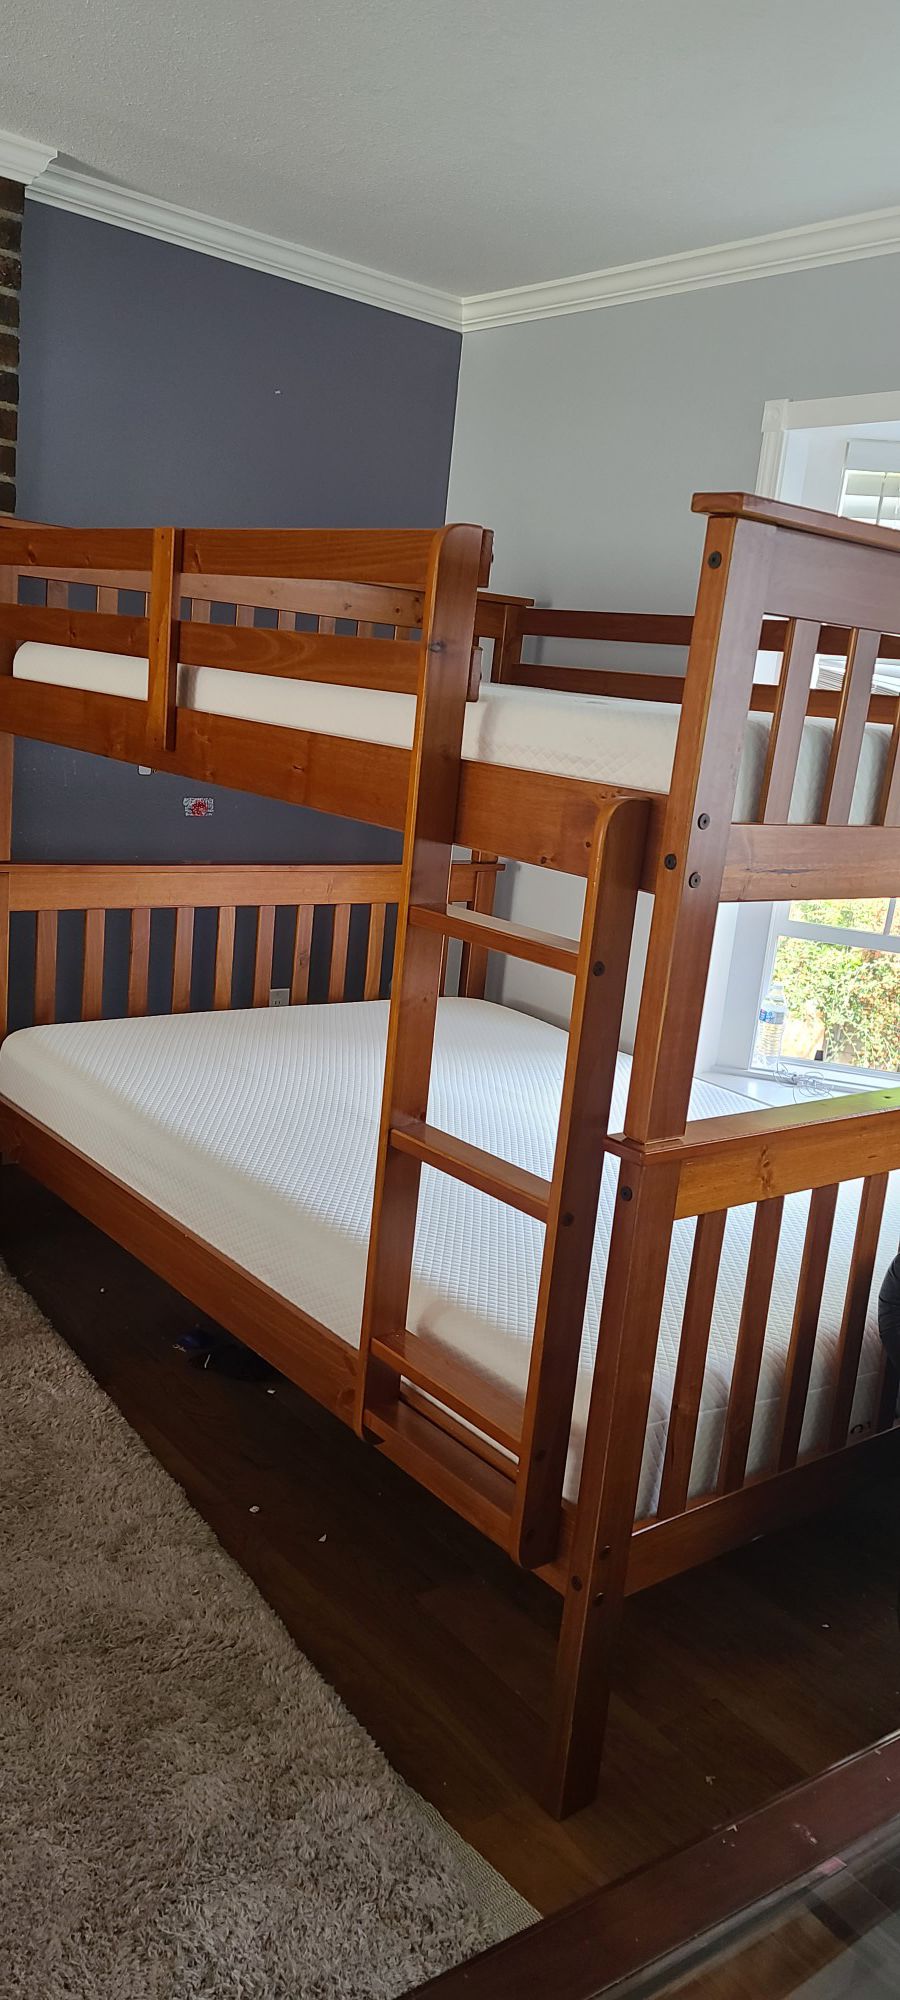 Bunk bed full size.